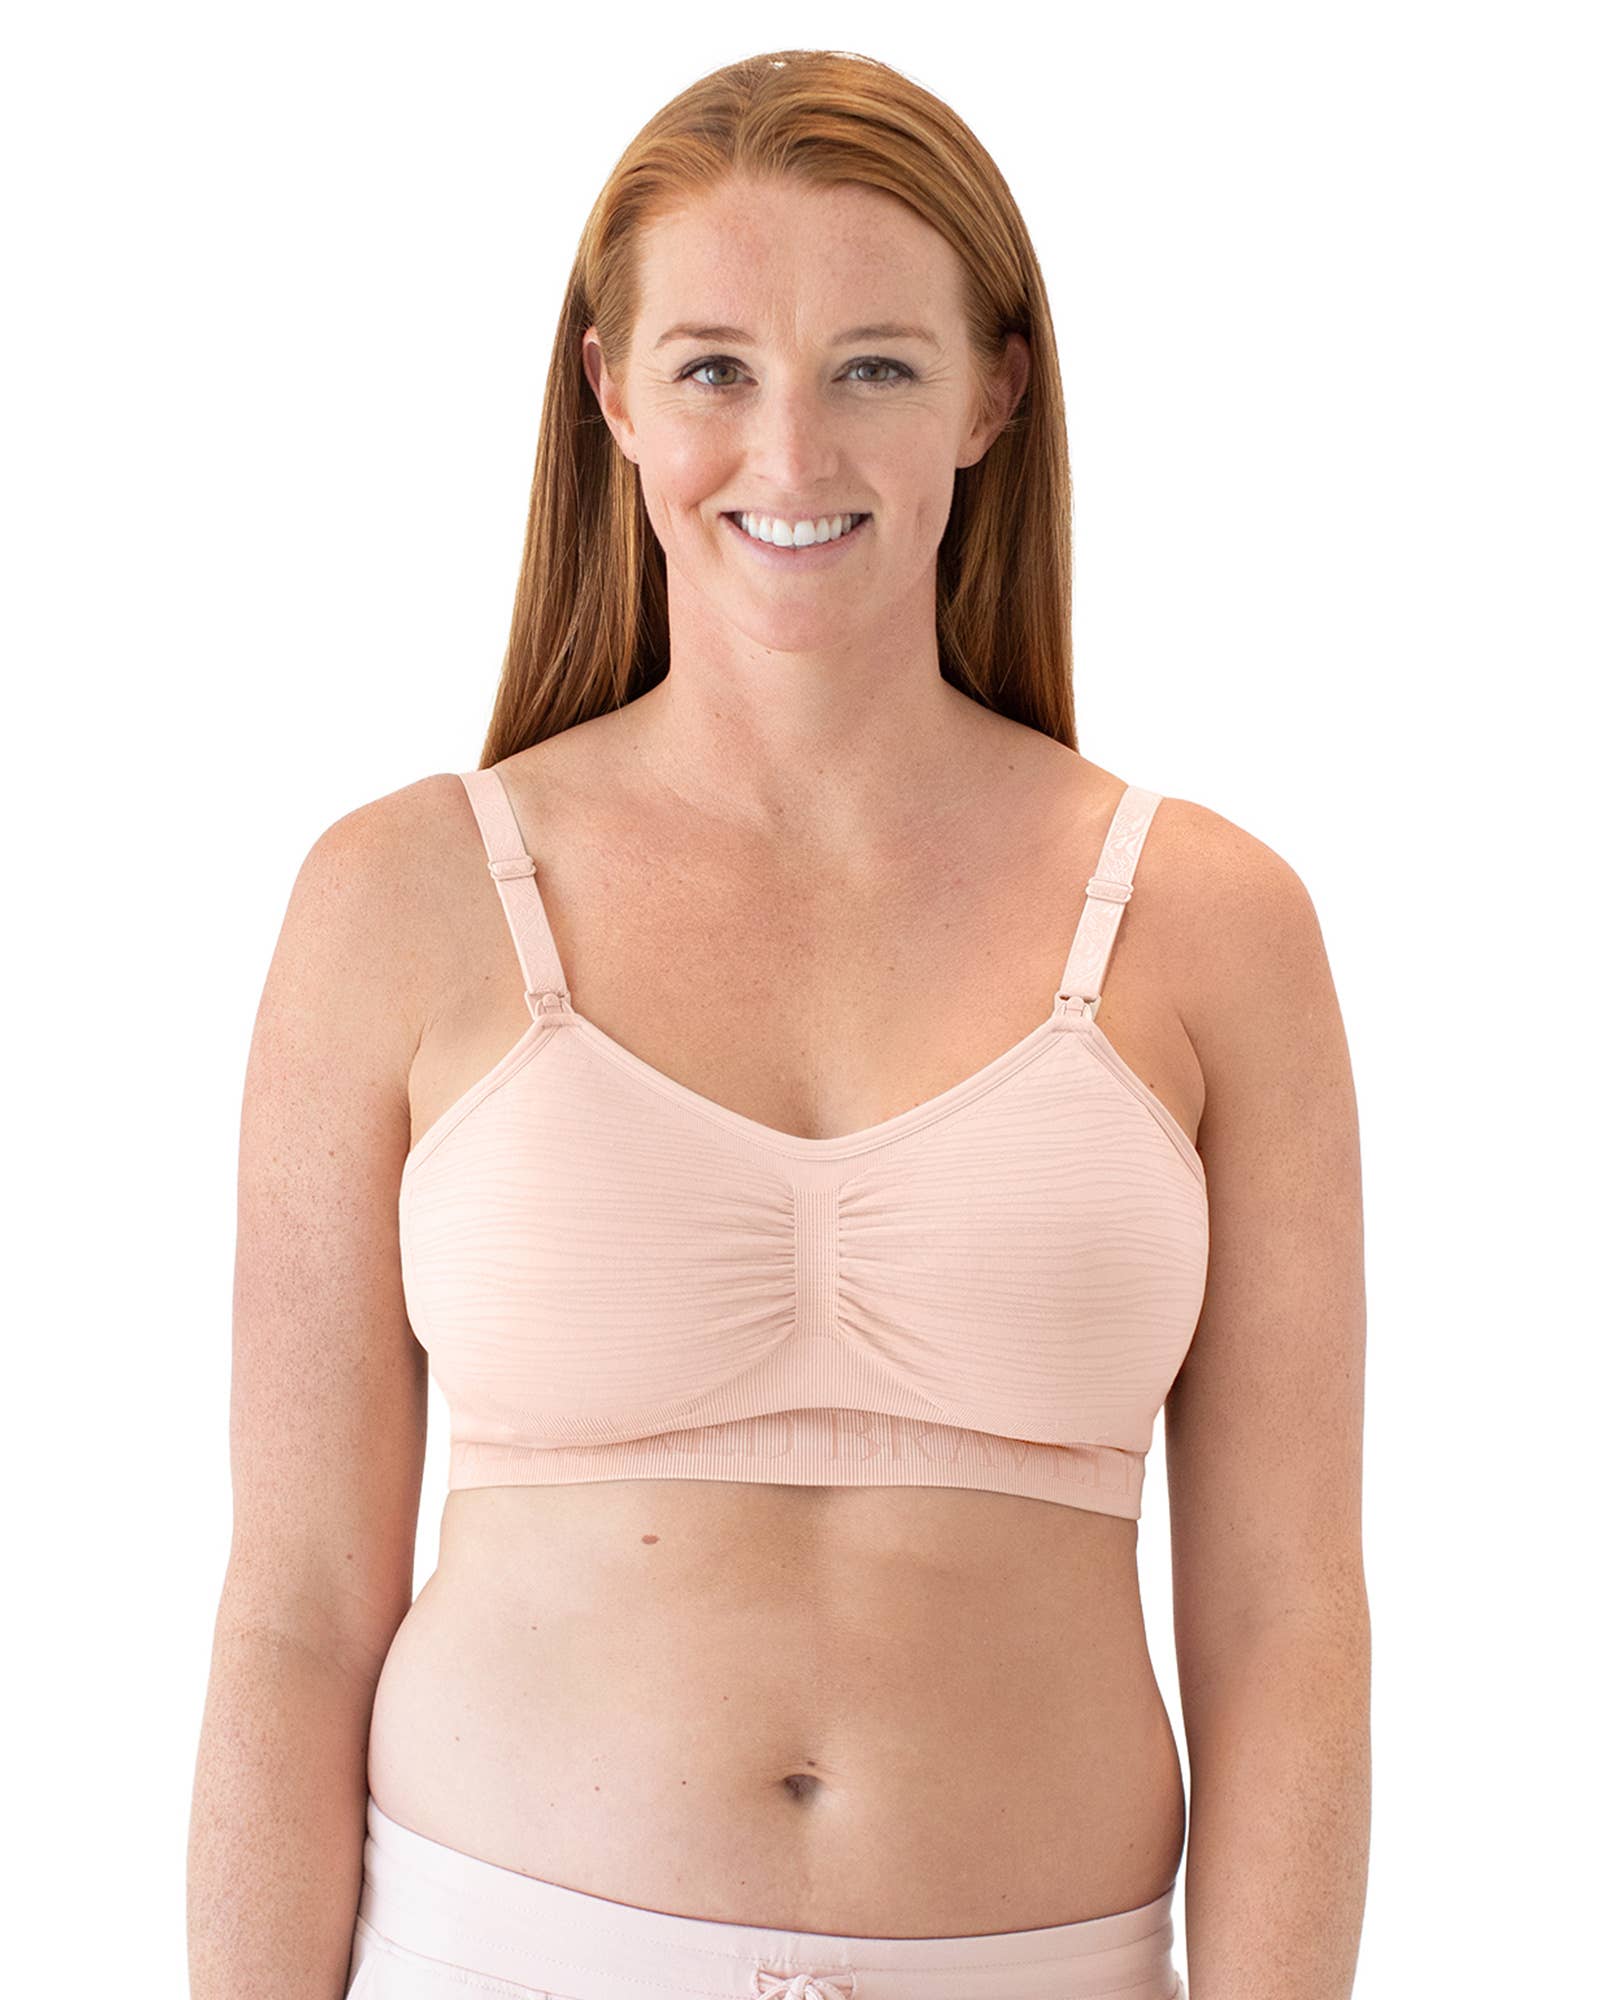 Kindred Bravely Sublime Pumping and Nursing Sports Bra 